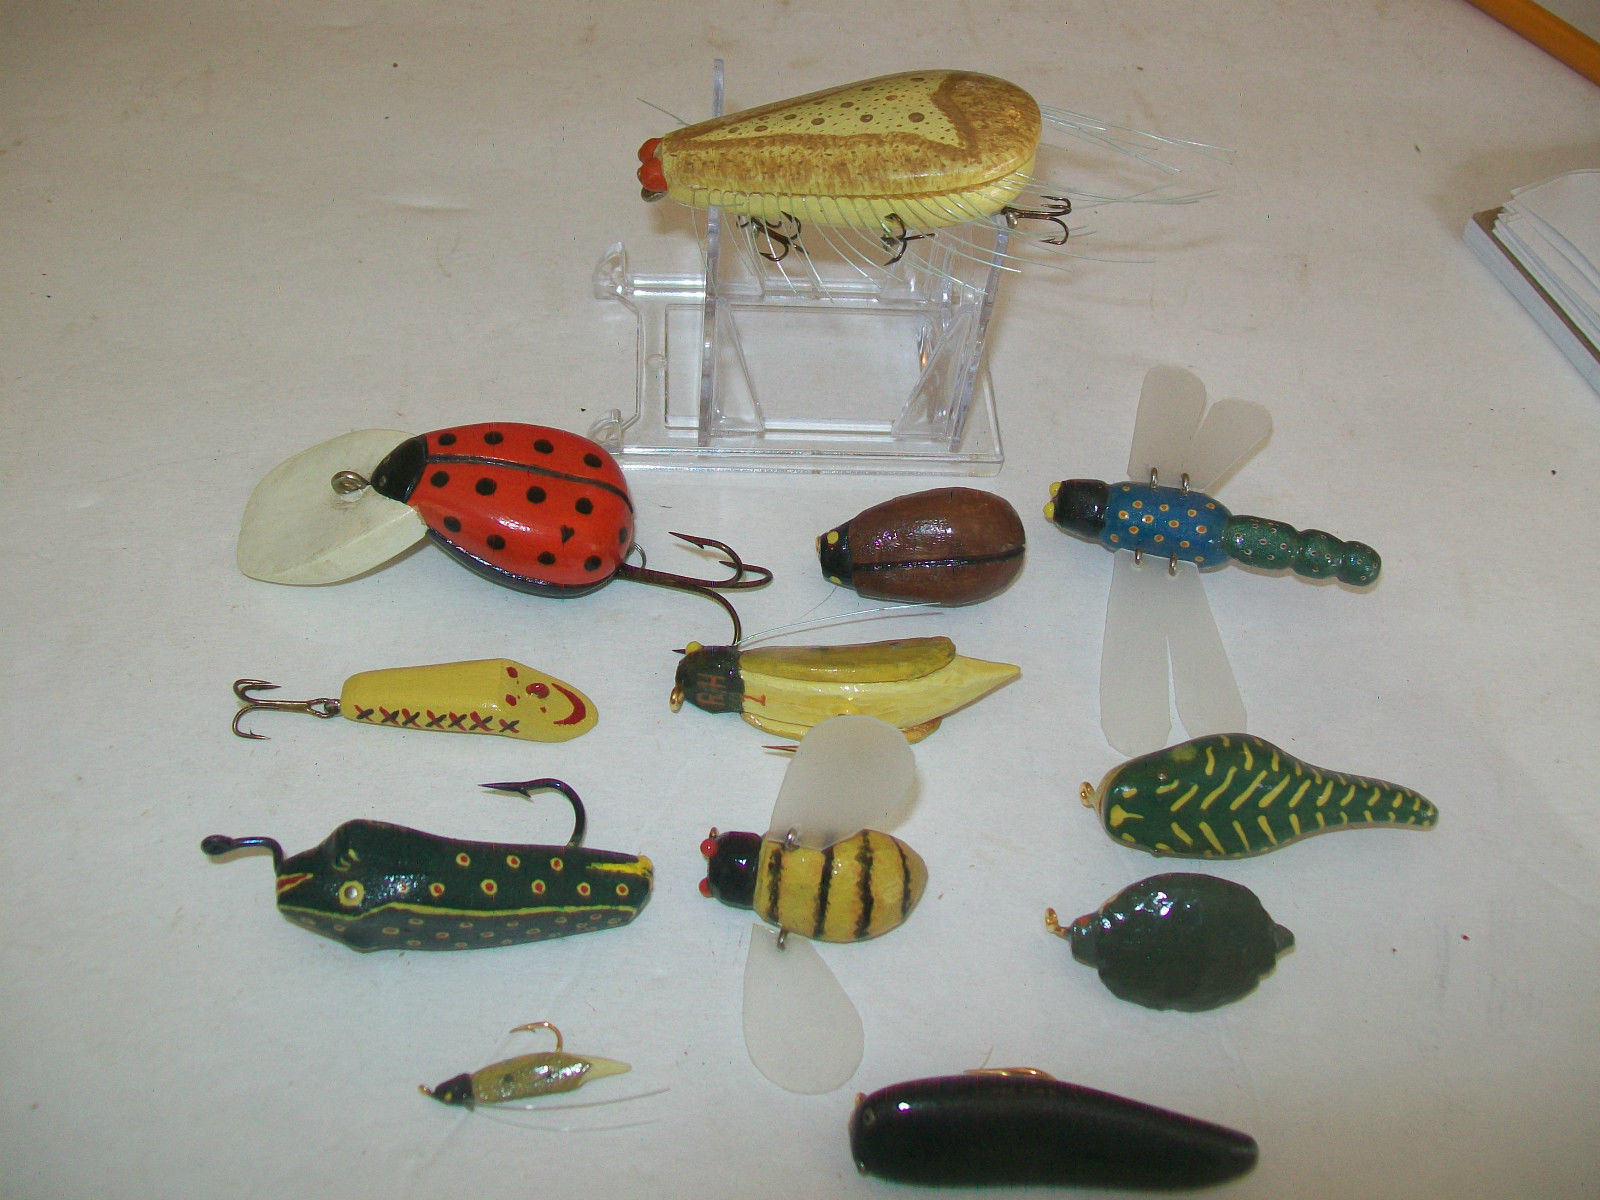 Chance's Folk Art Fishing Lure Research Blog: Chance's Weekly likes